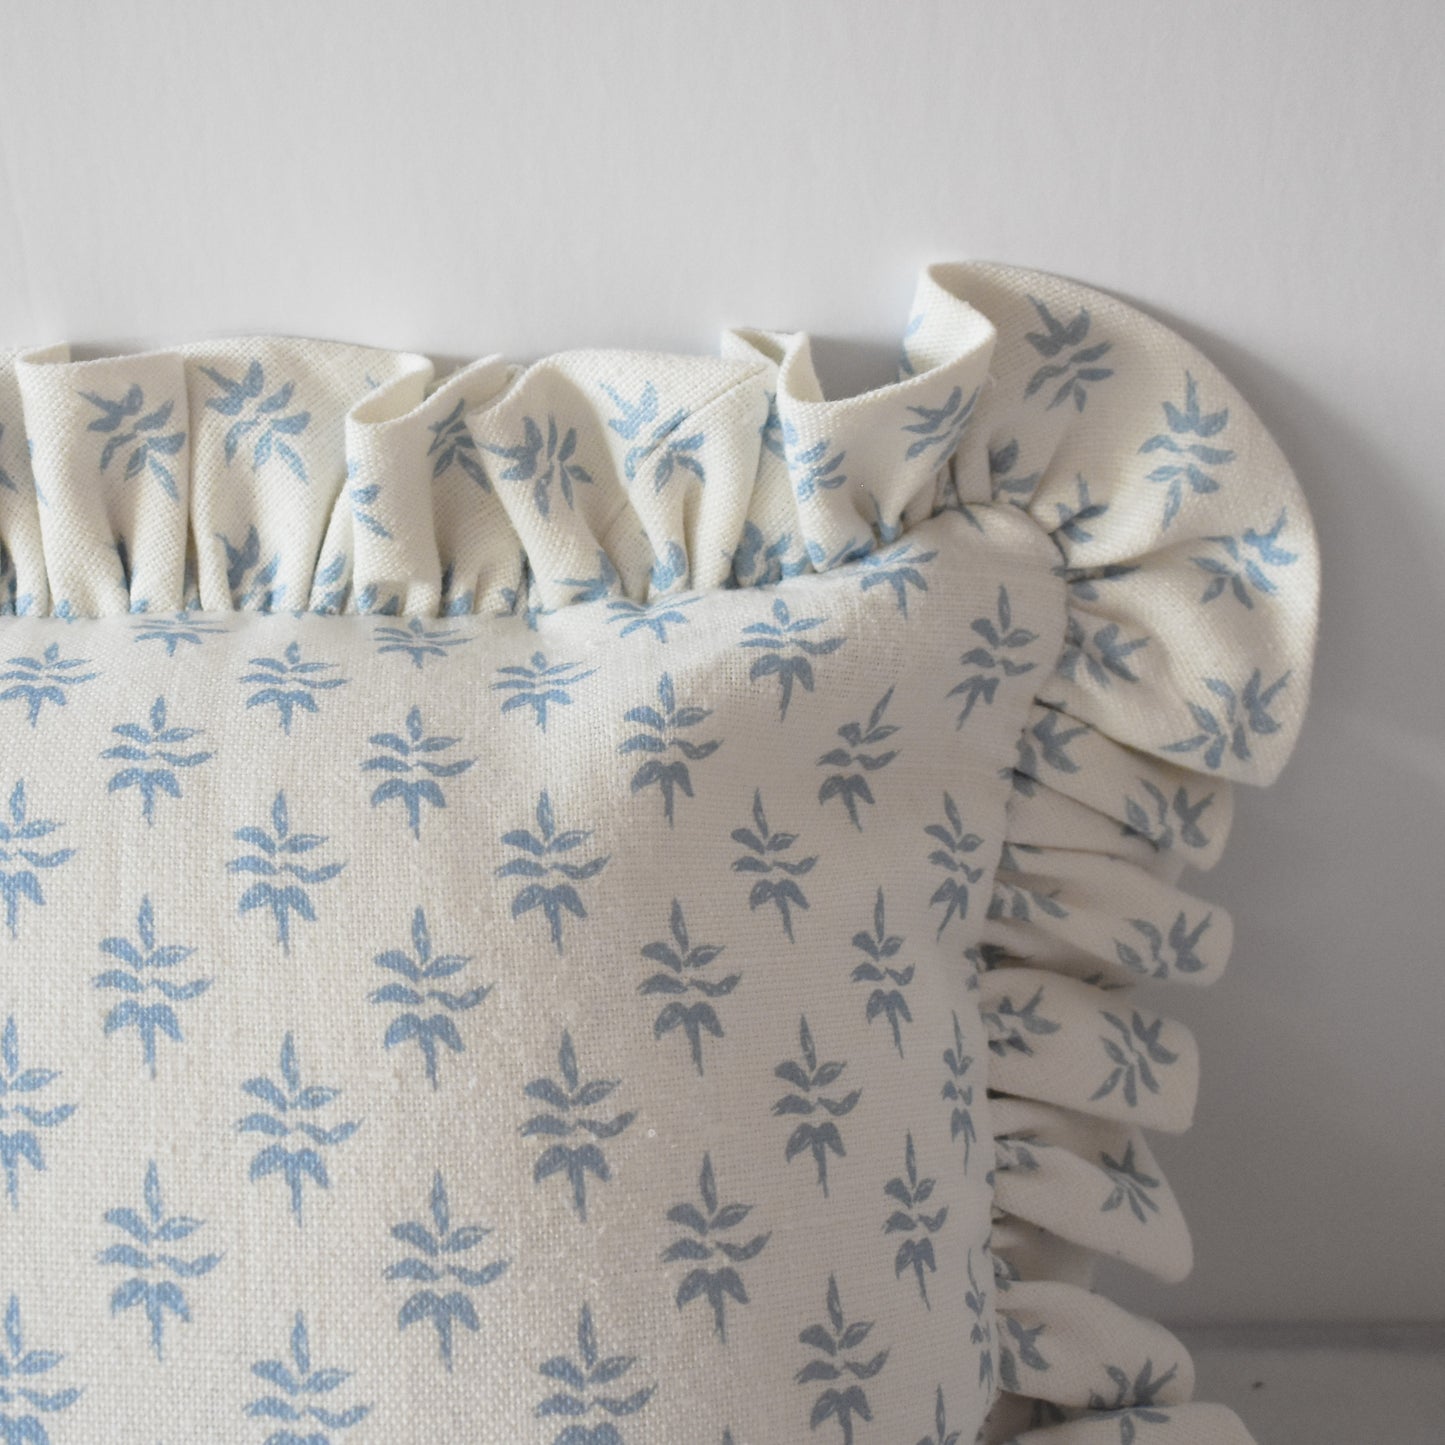 Laurel Leaf Pillow with Ruffle in Blue & Oyster